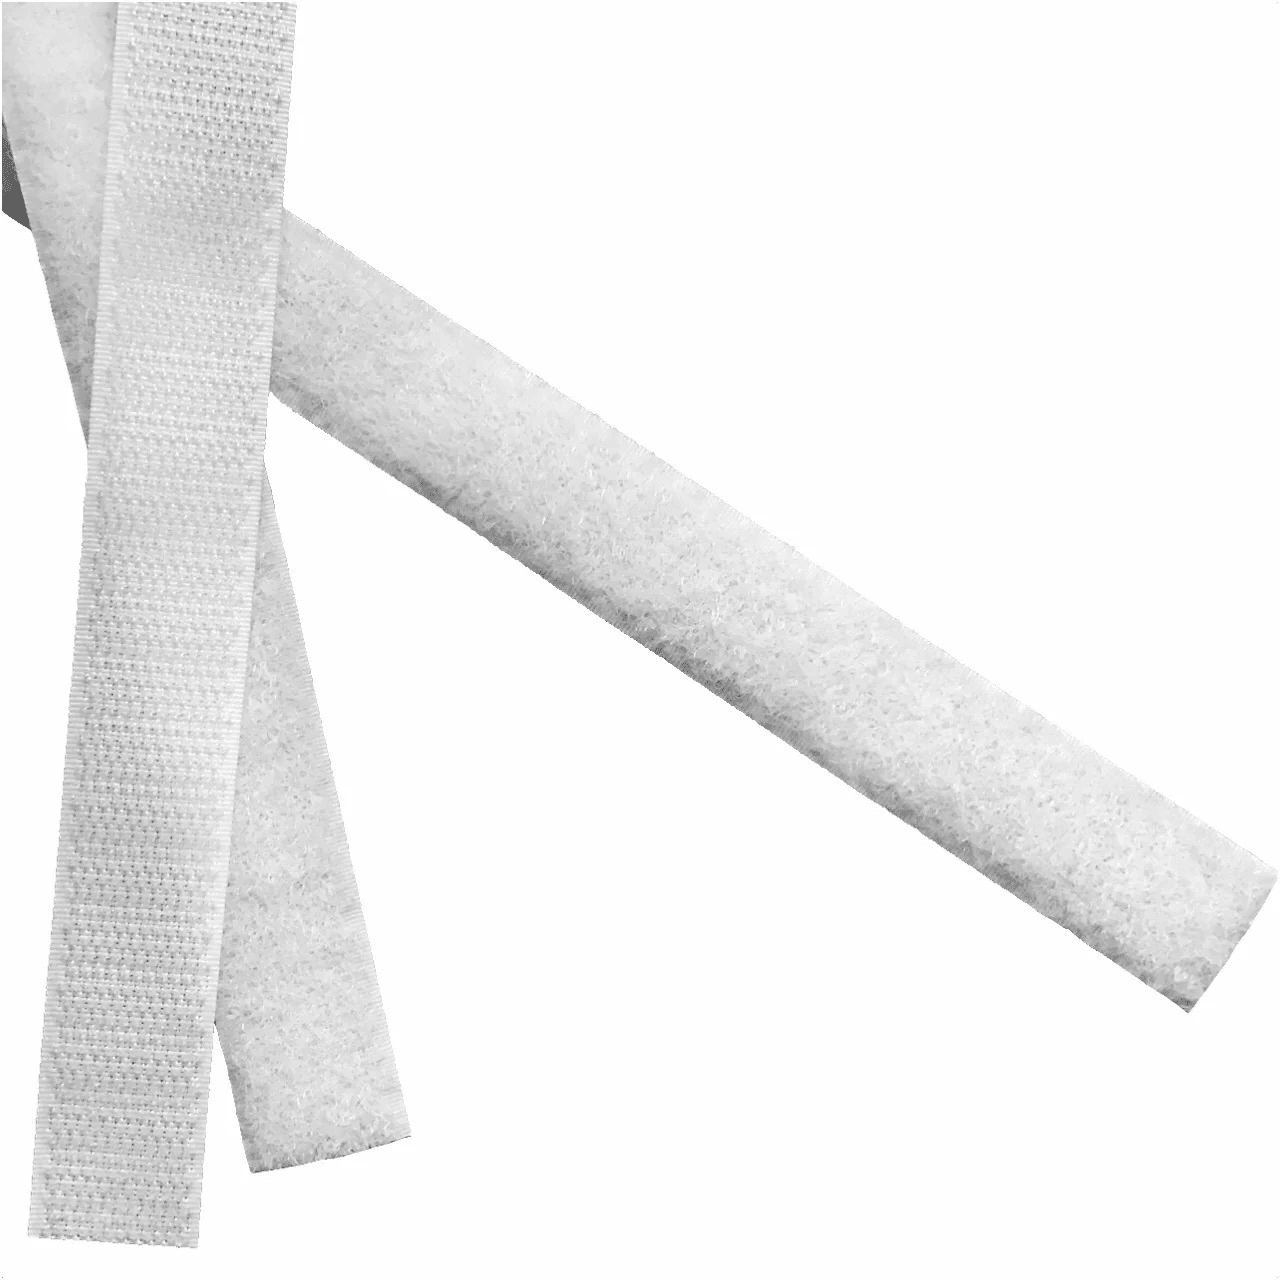 Sew-On - VELCRO®brand Fasteners LOOP, White, 18mm – Bibs And Boots Fabric